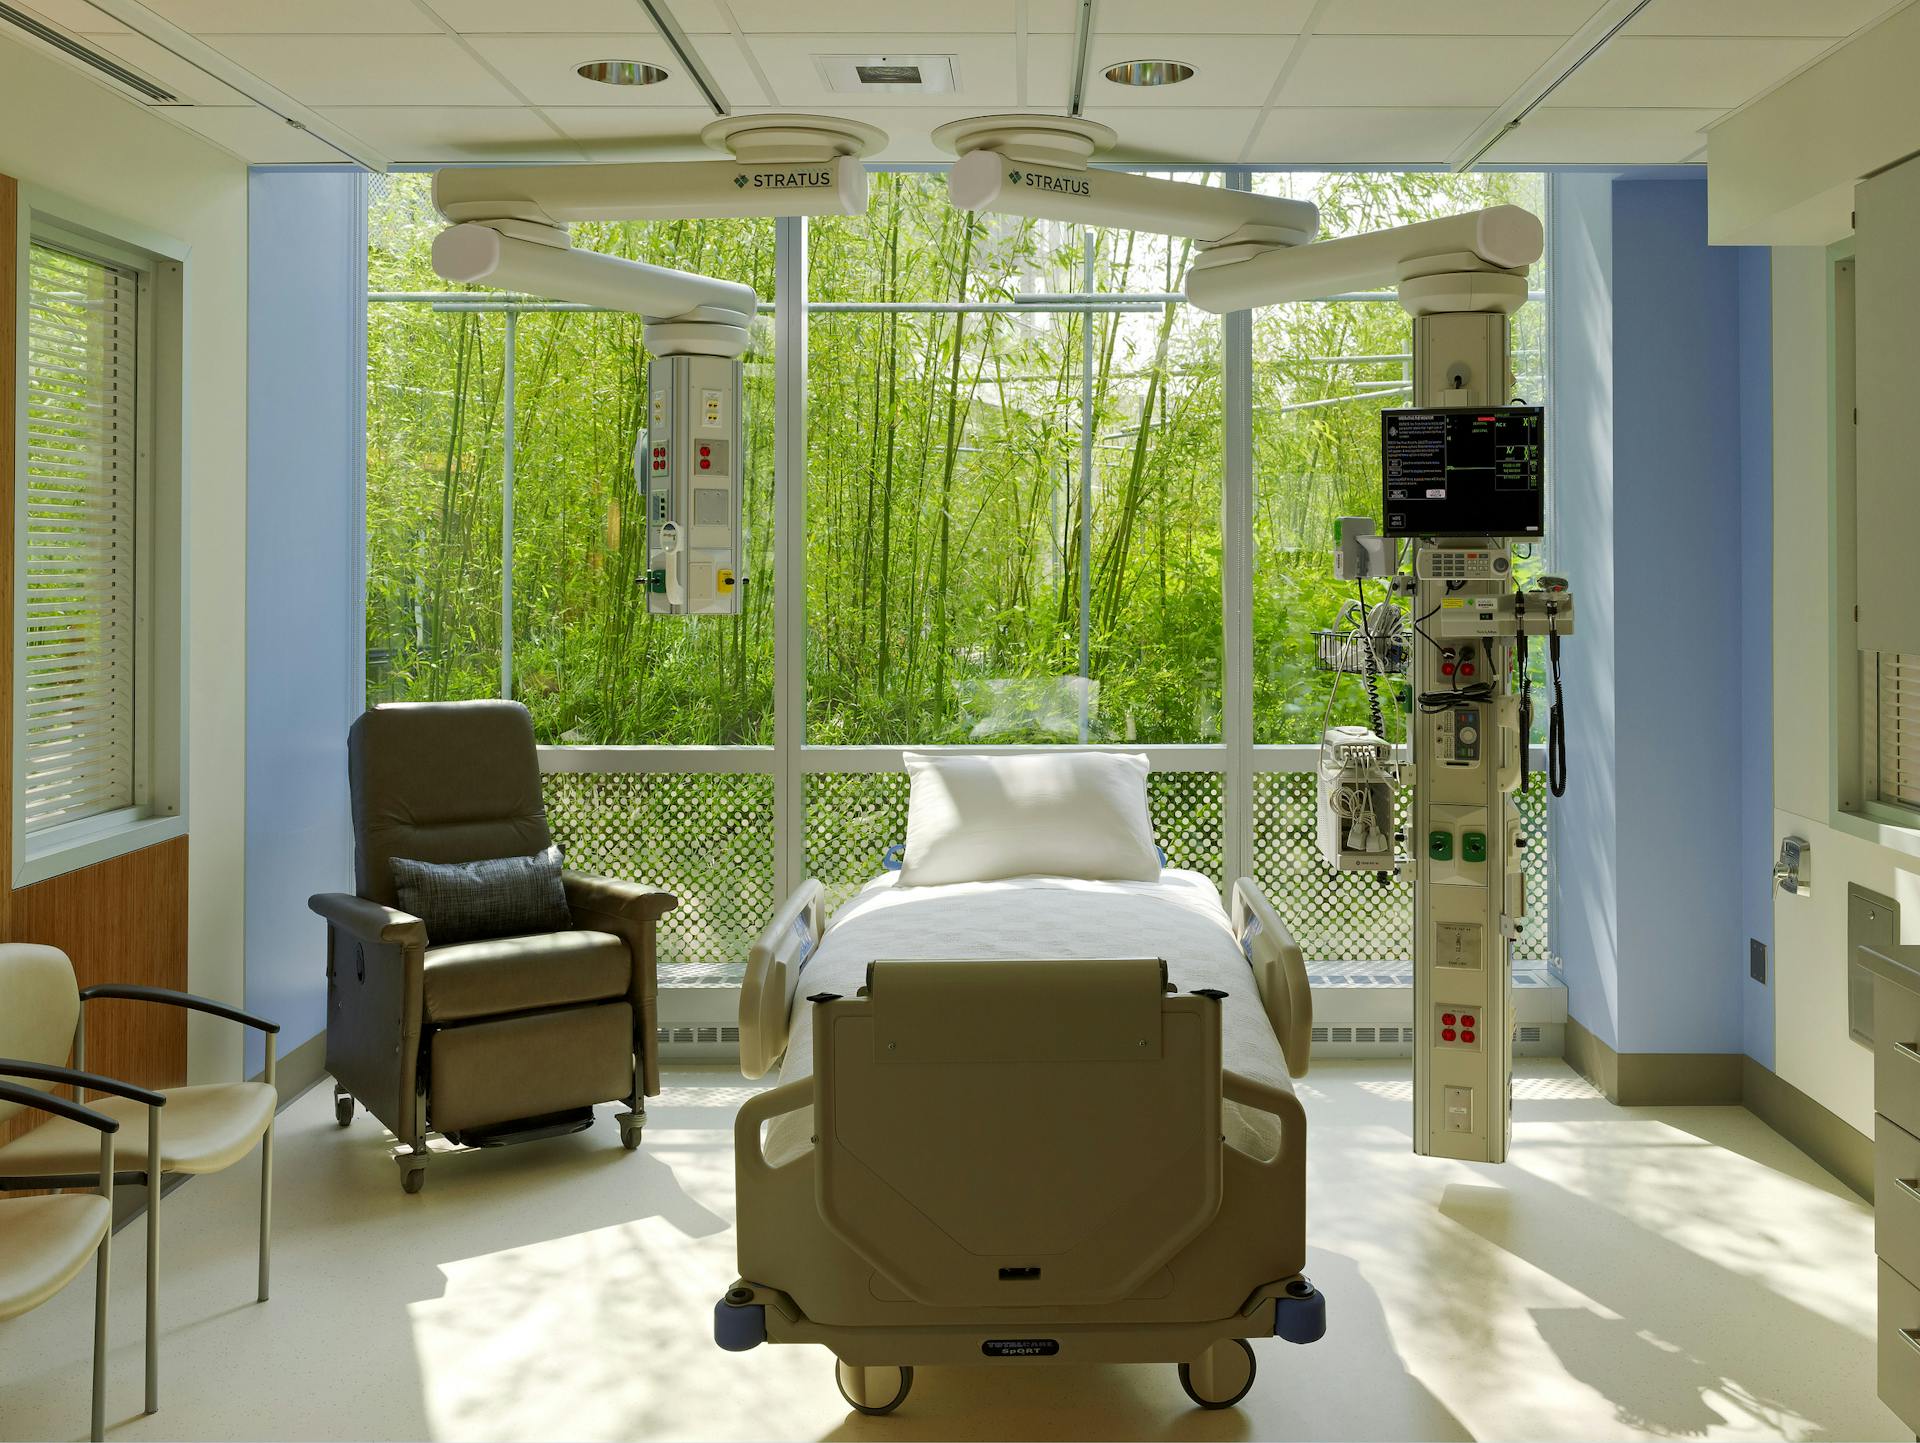 ICU Patient Room with access to bamboo garden/daylight, A+U